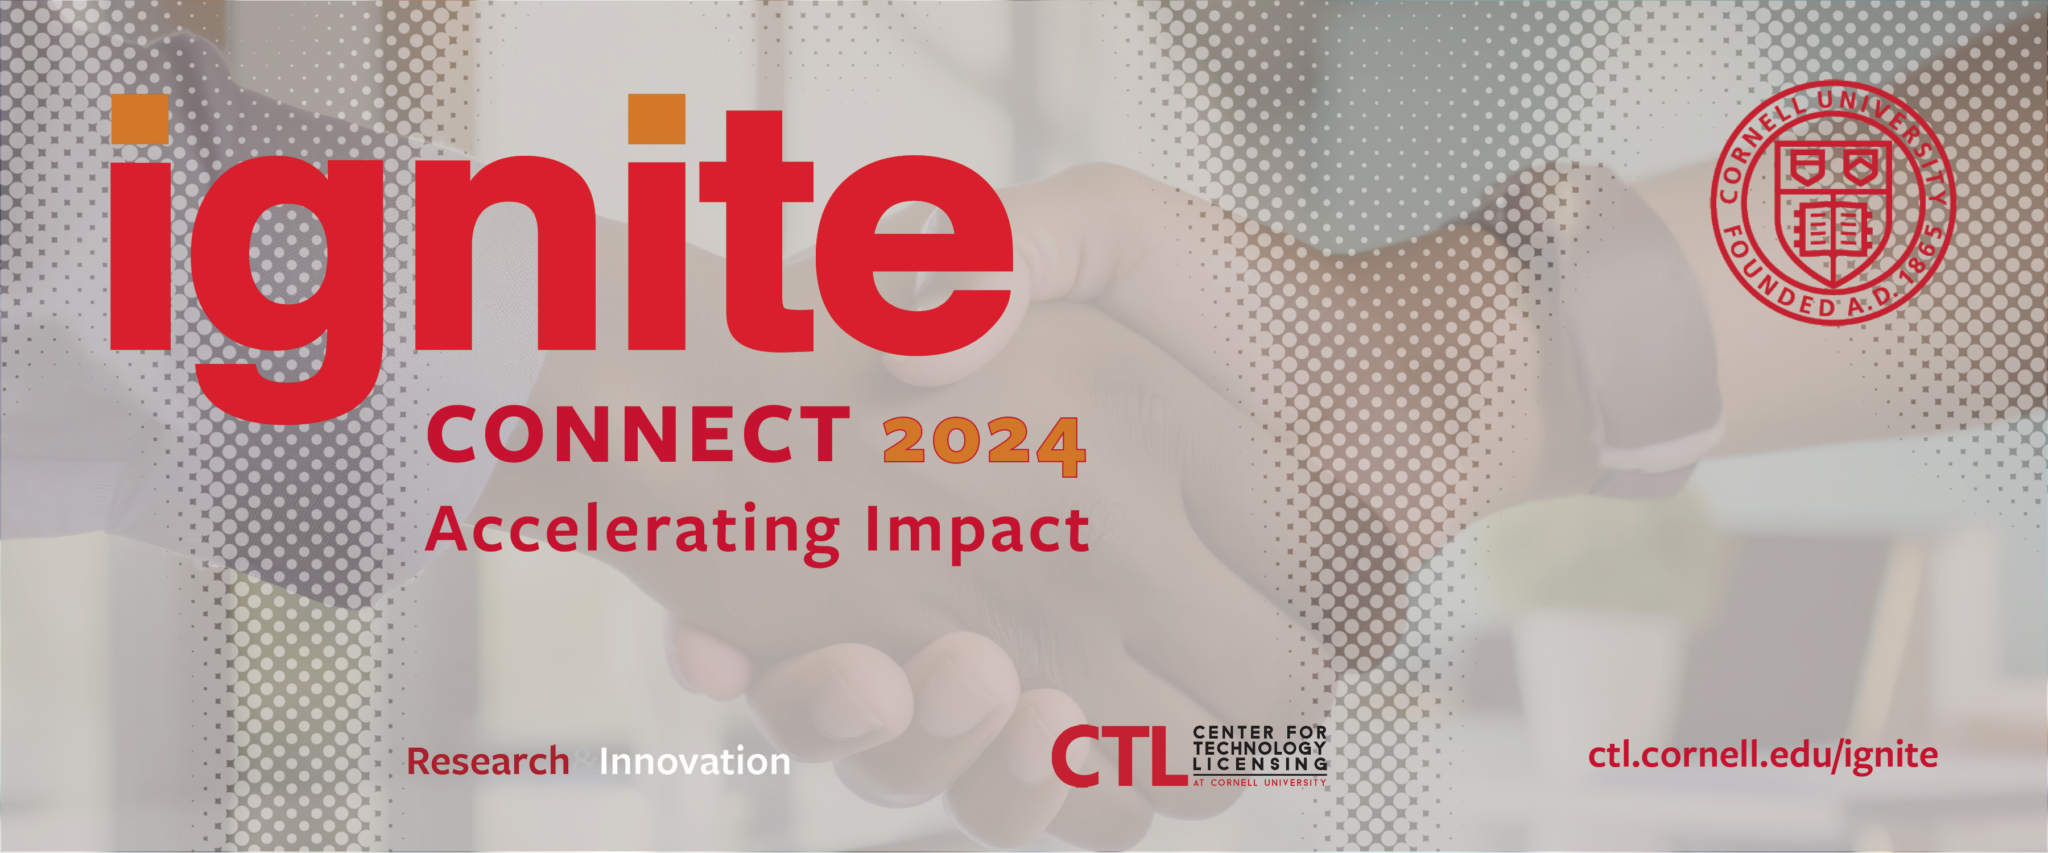 Two hands shaking in the background. The title "ignite connect 2024" in Cornell red and orange colors.